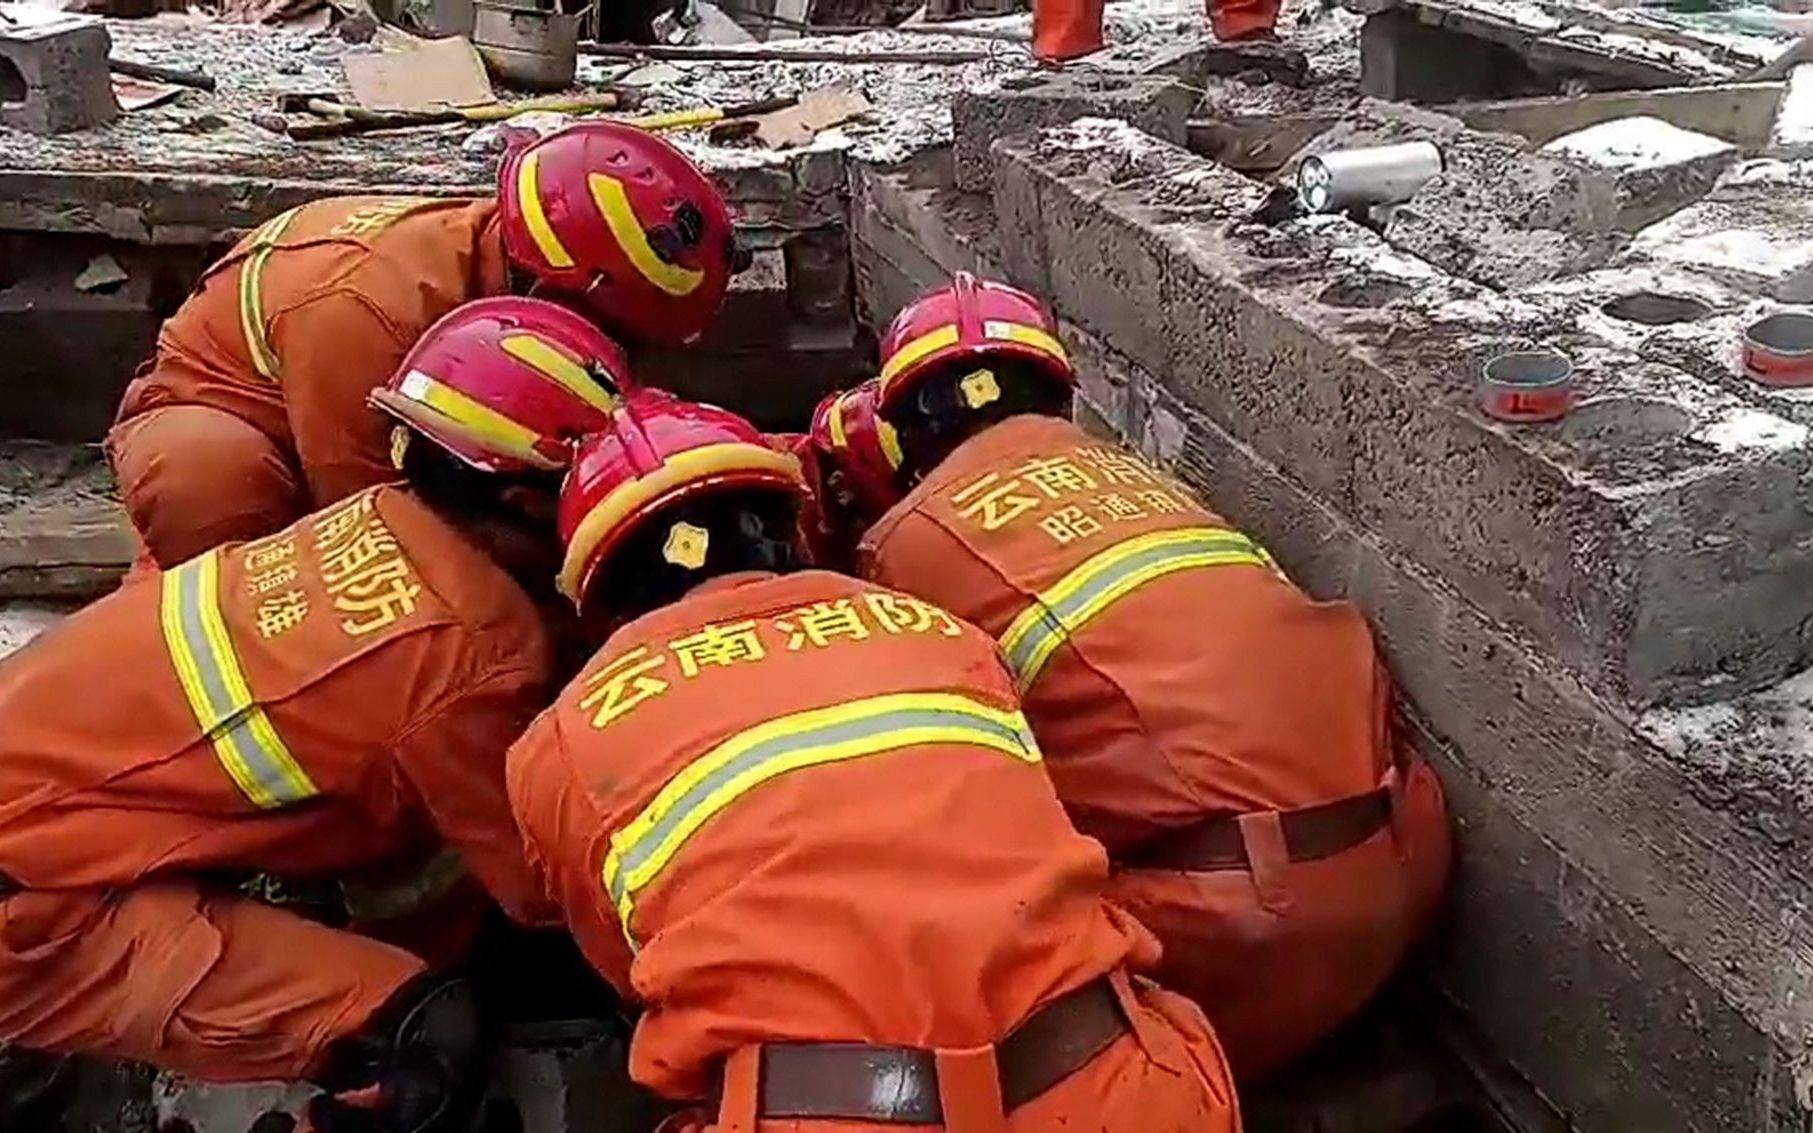 landslide buries 47 people in mountainous southern china